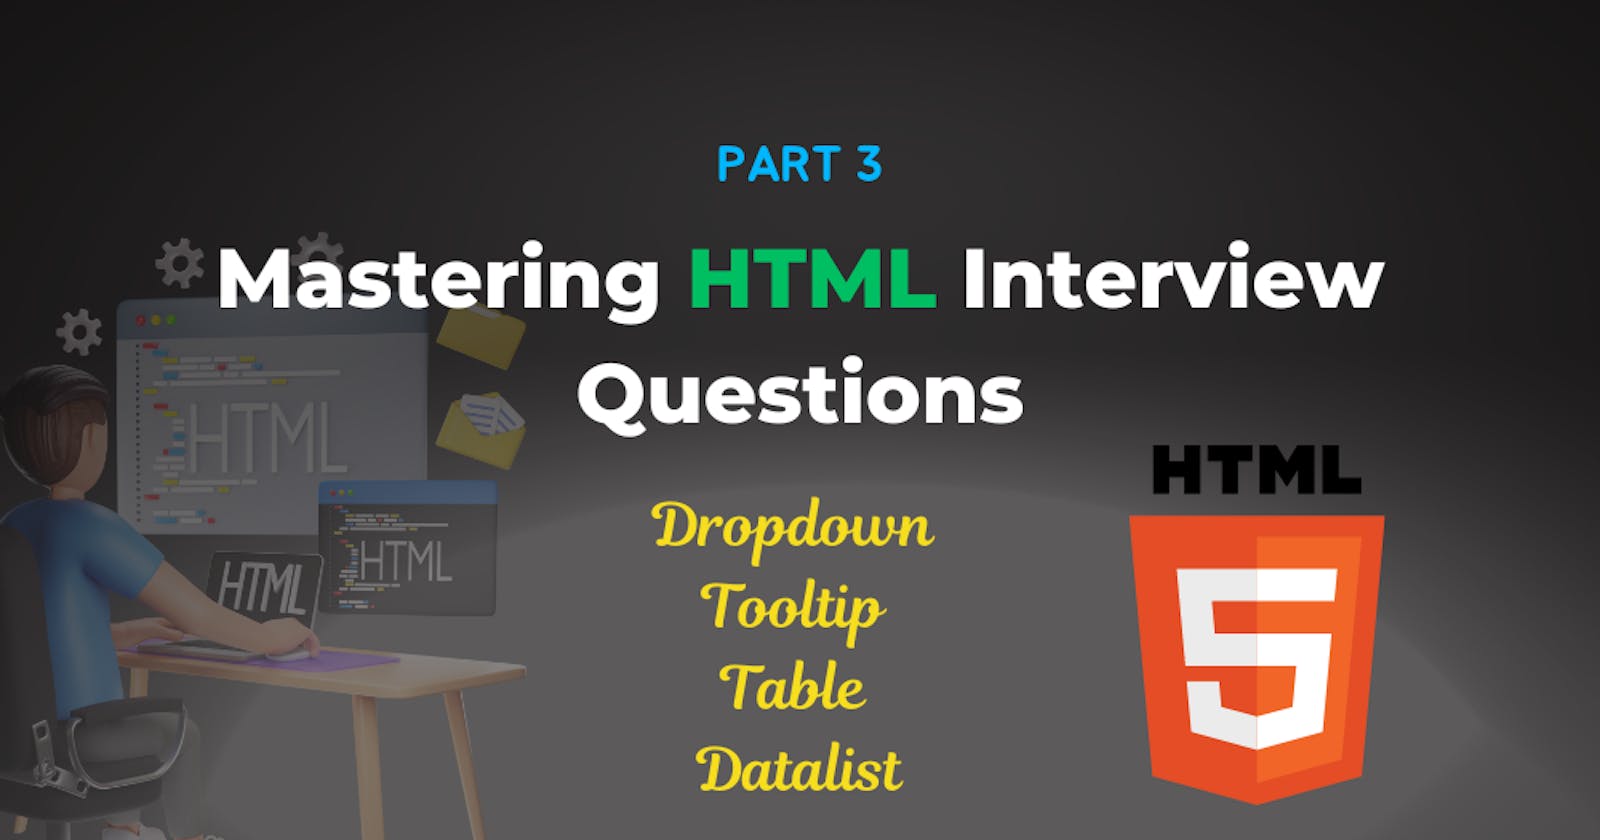 Mastering HTML Interview Questions Part-3: Custom Bullets, Form Validation, Table and YouTube Embeds